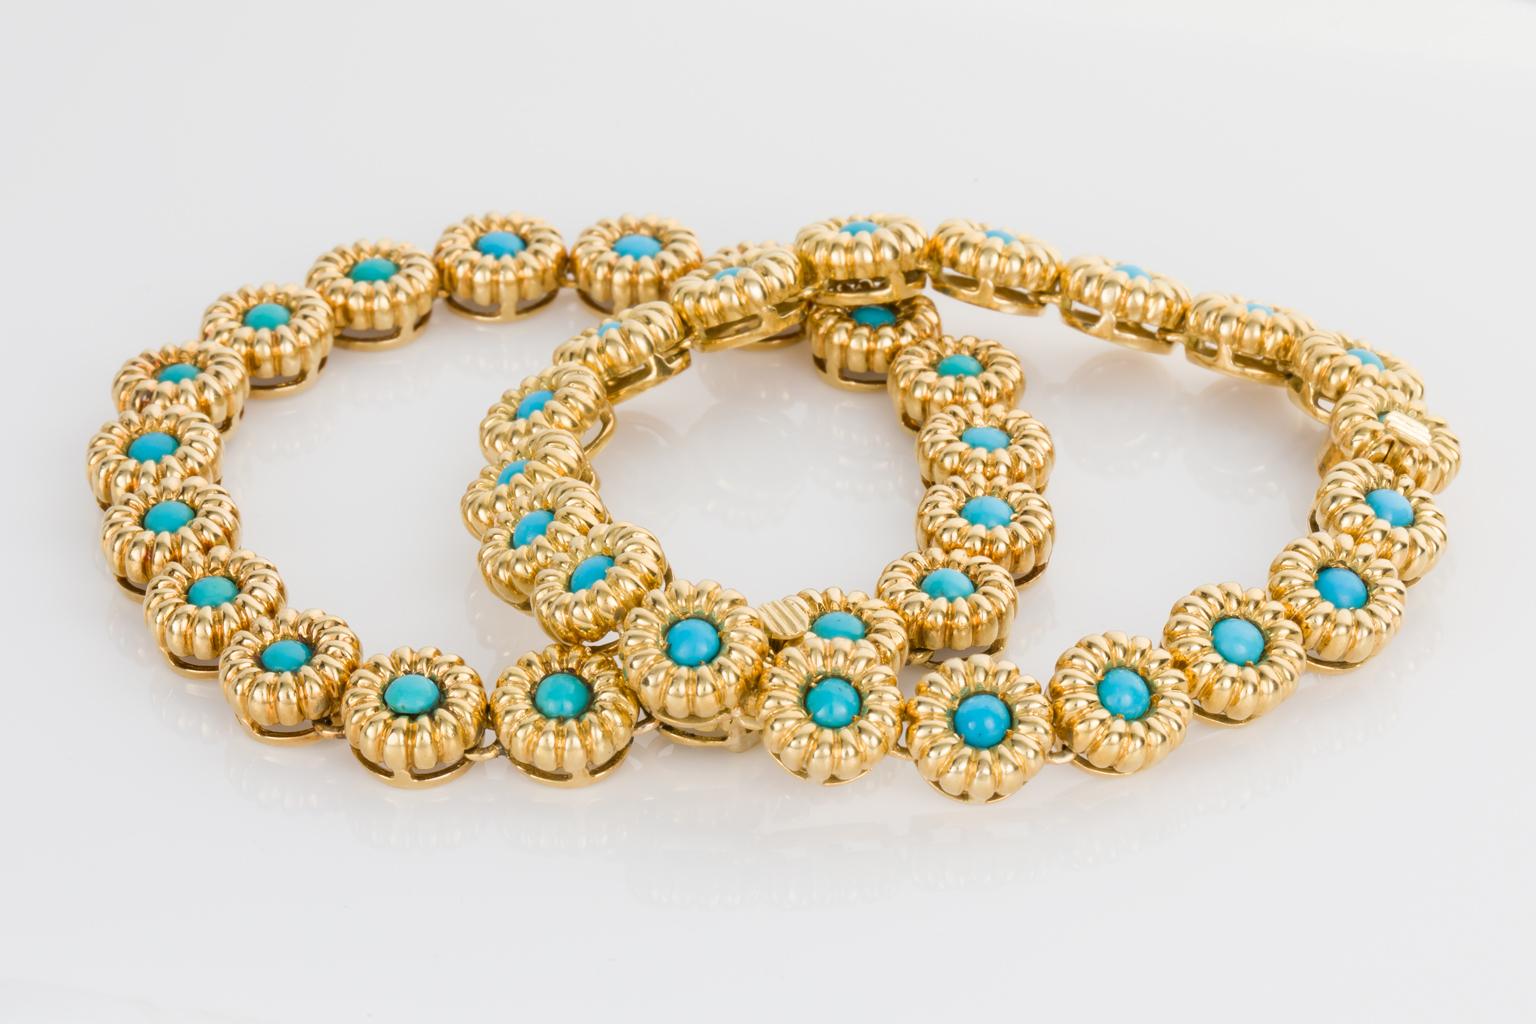 18 Karat Yellow Gold Turquoise Bracelets or Choker Necklace For Sale 4